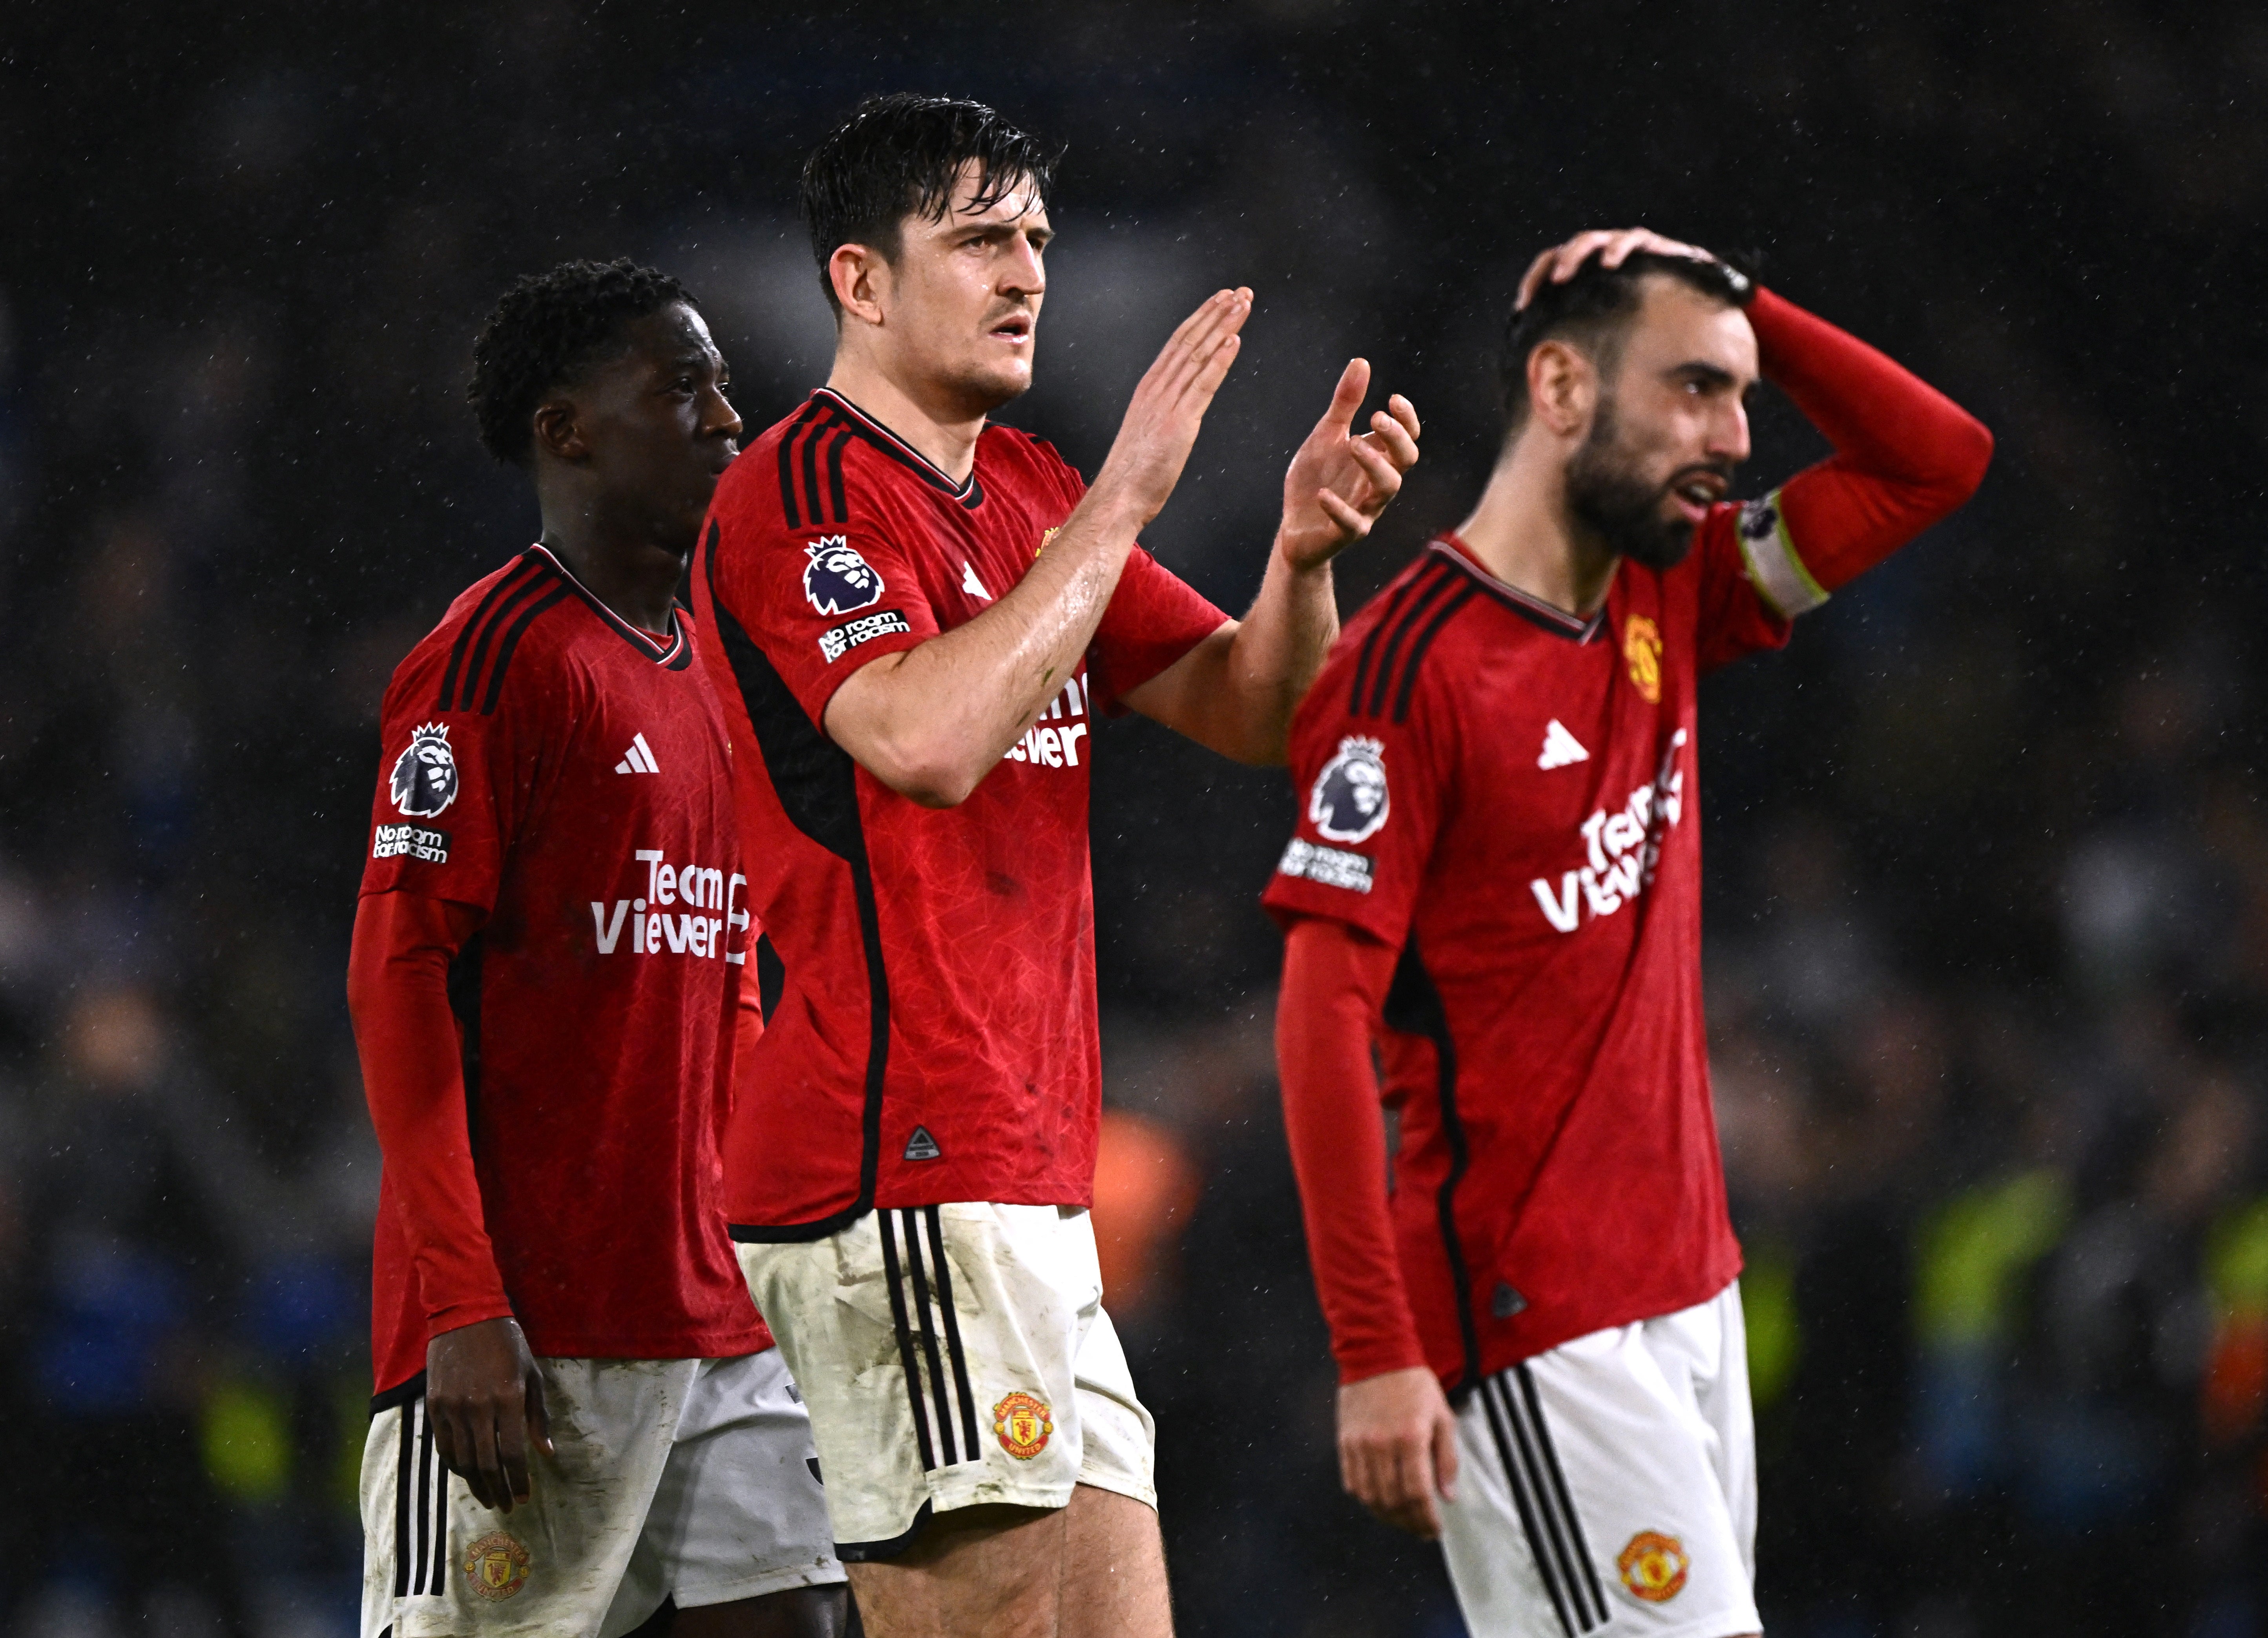 Manchester United conceded two late goals to lose 4-3 to Chelsea at Stamford Bridge